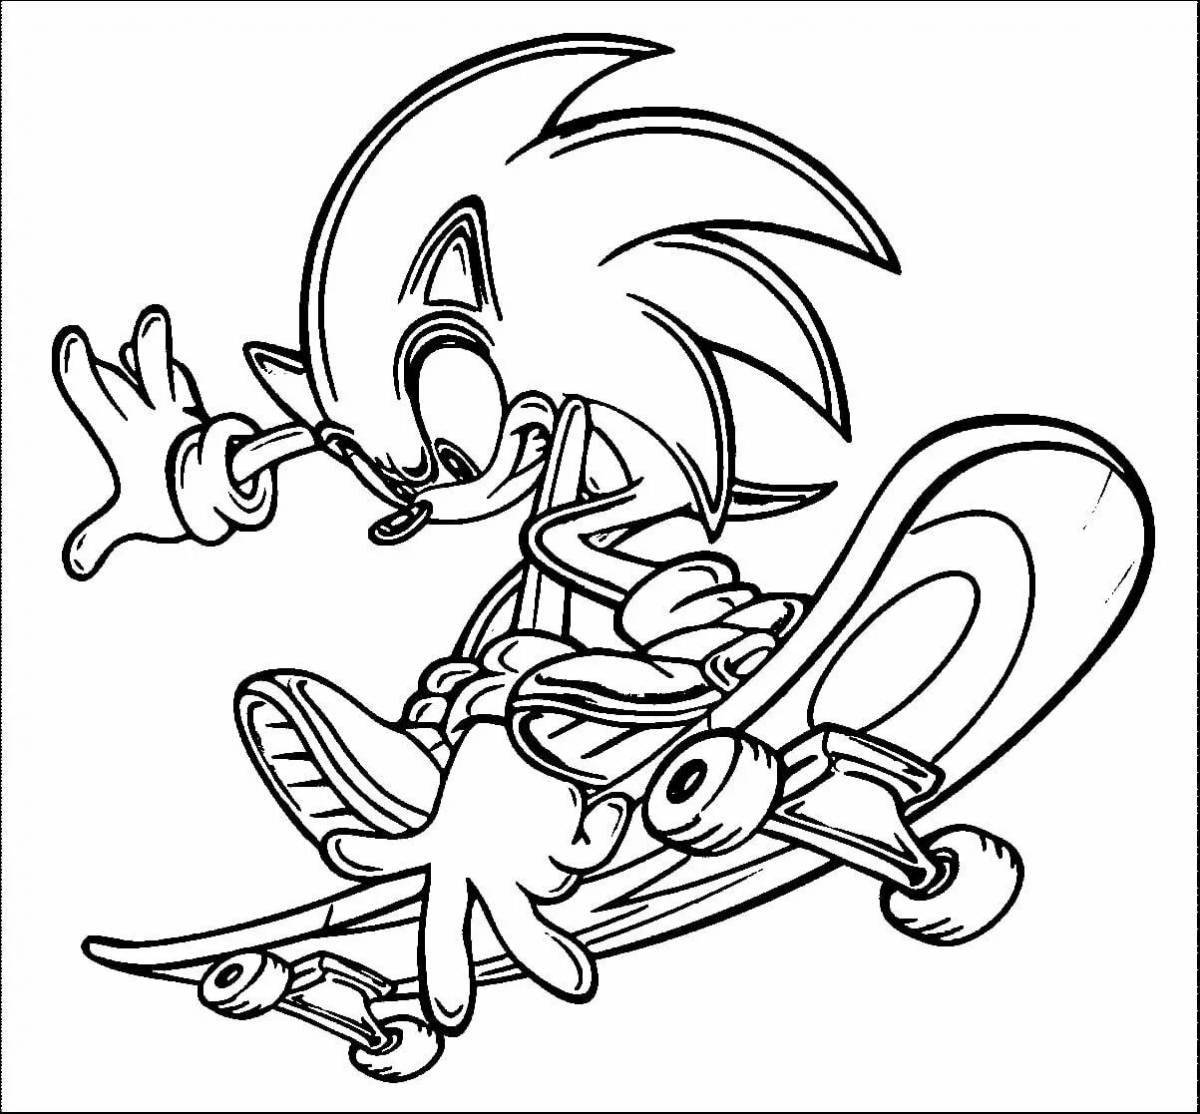 Colorful darkspine sonic coloring page